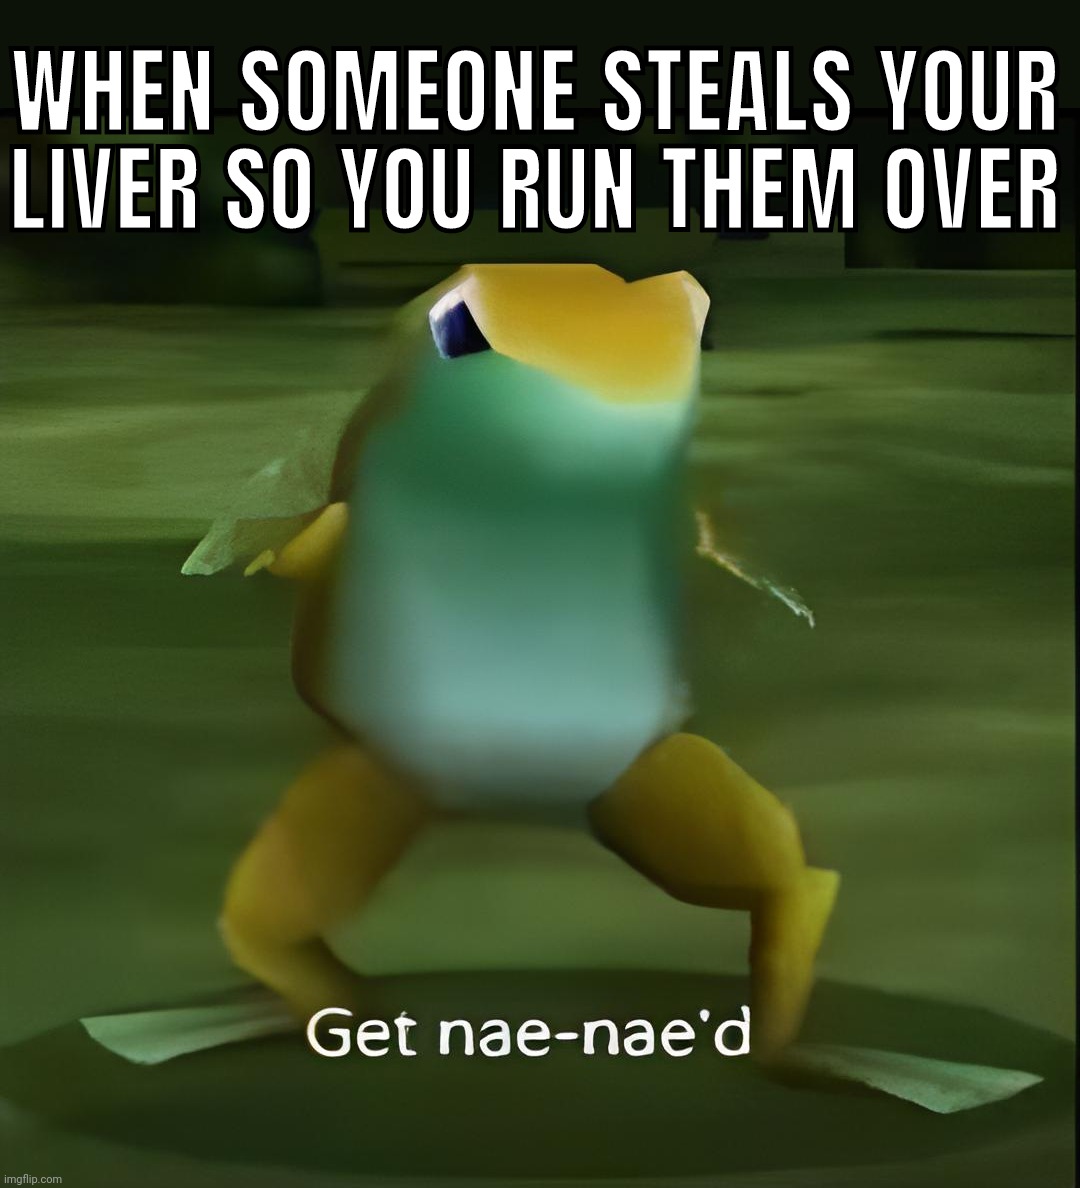 Get nae-nae'd | WHEN SOMEONE STEALS YOUR LIVER SO YOU RUN THEM OVER | image tagged in get nae-nae'd | made w/ Imgflip meme maker